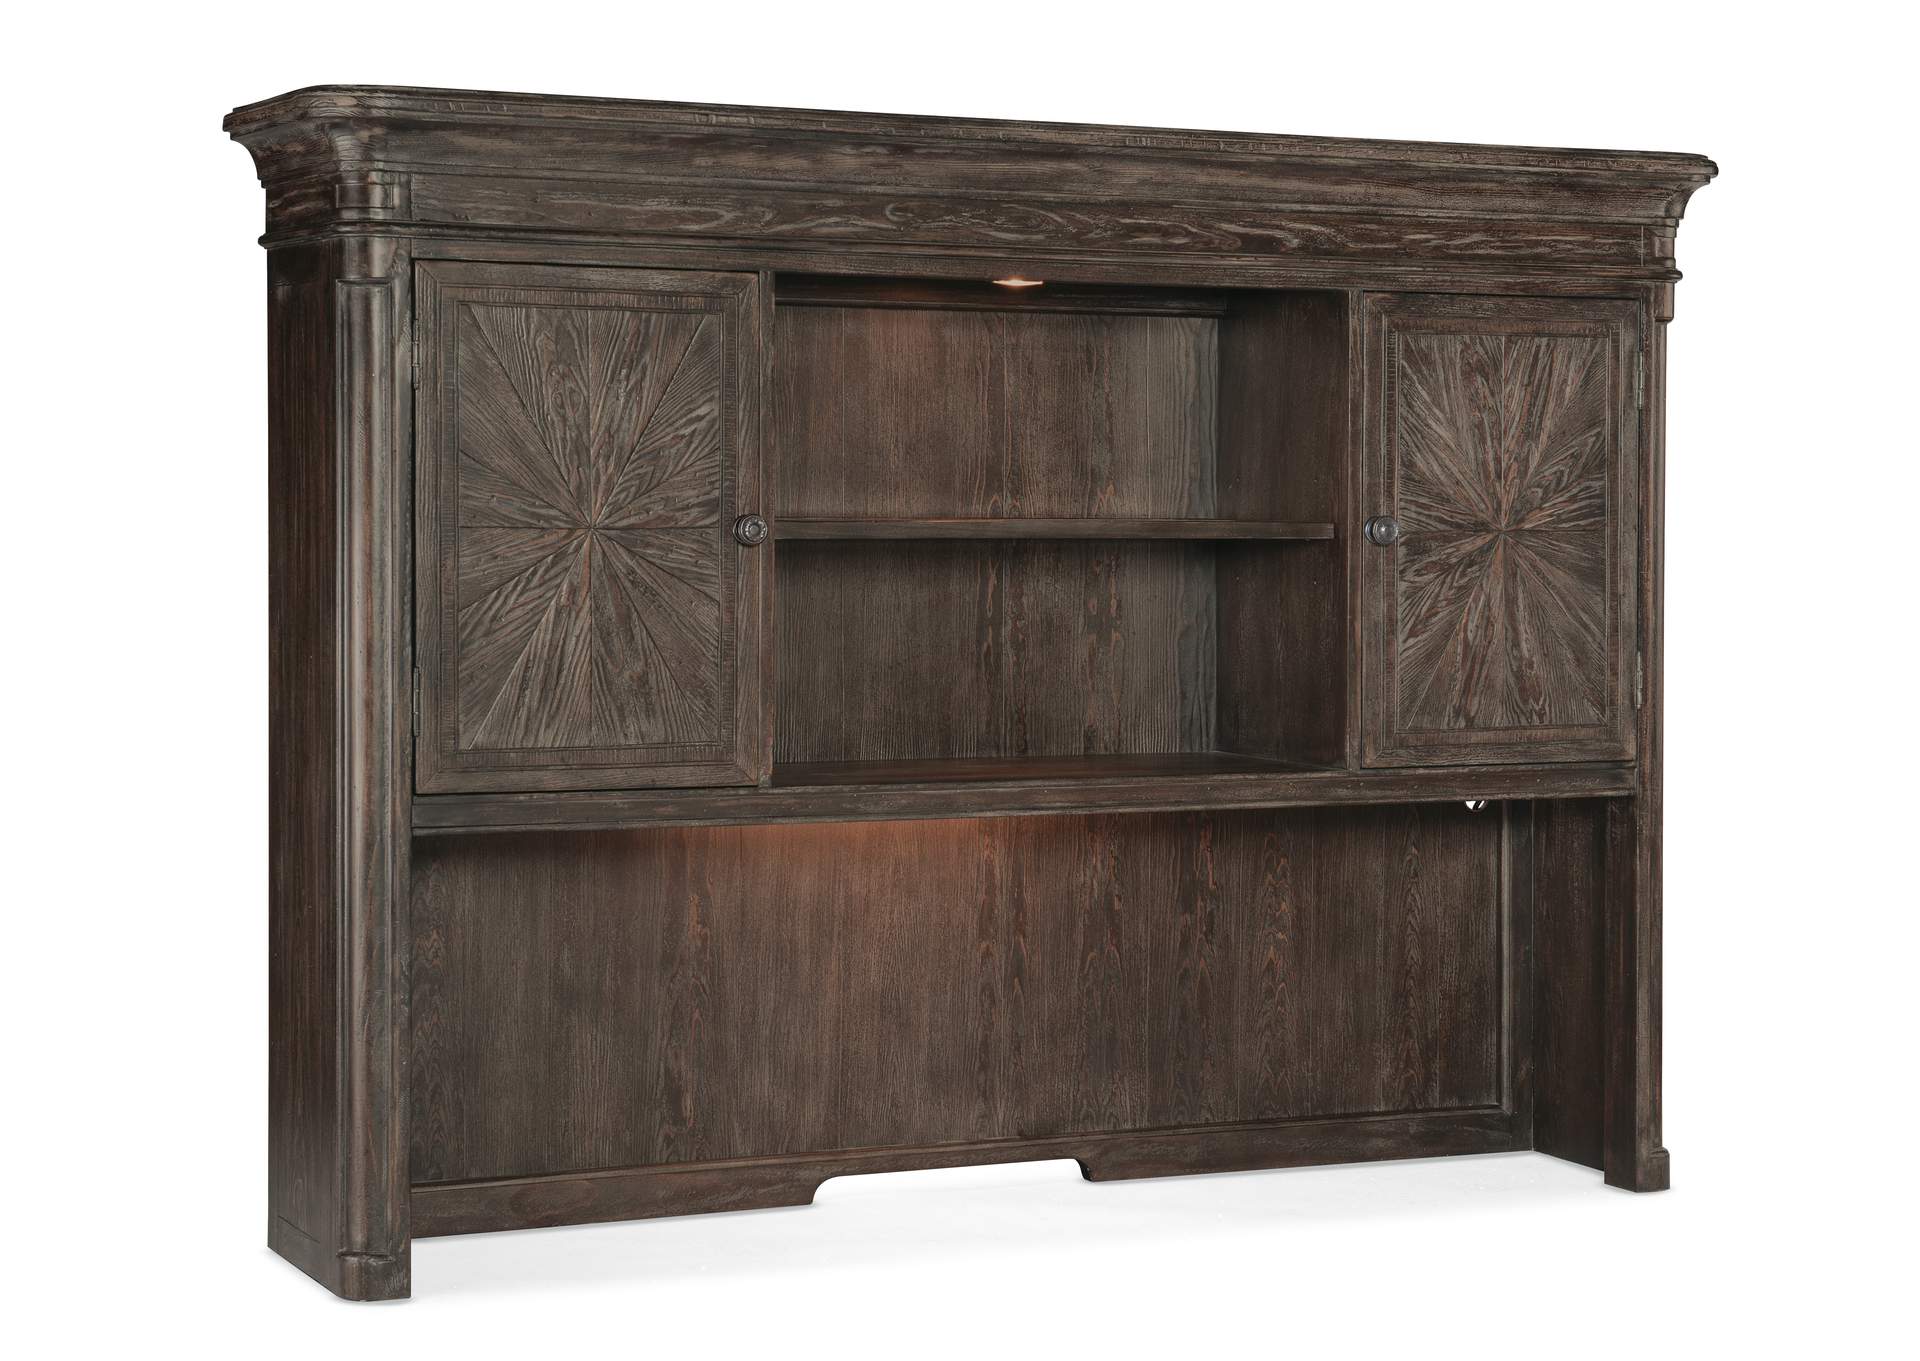 Traditions Computer Credenza Hutch,Hooker Furniture